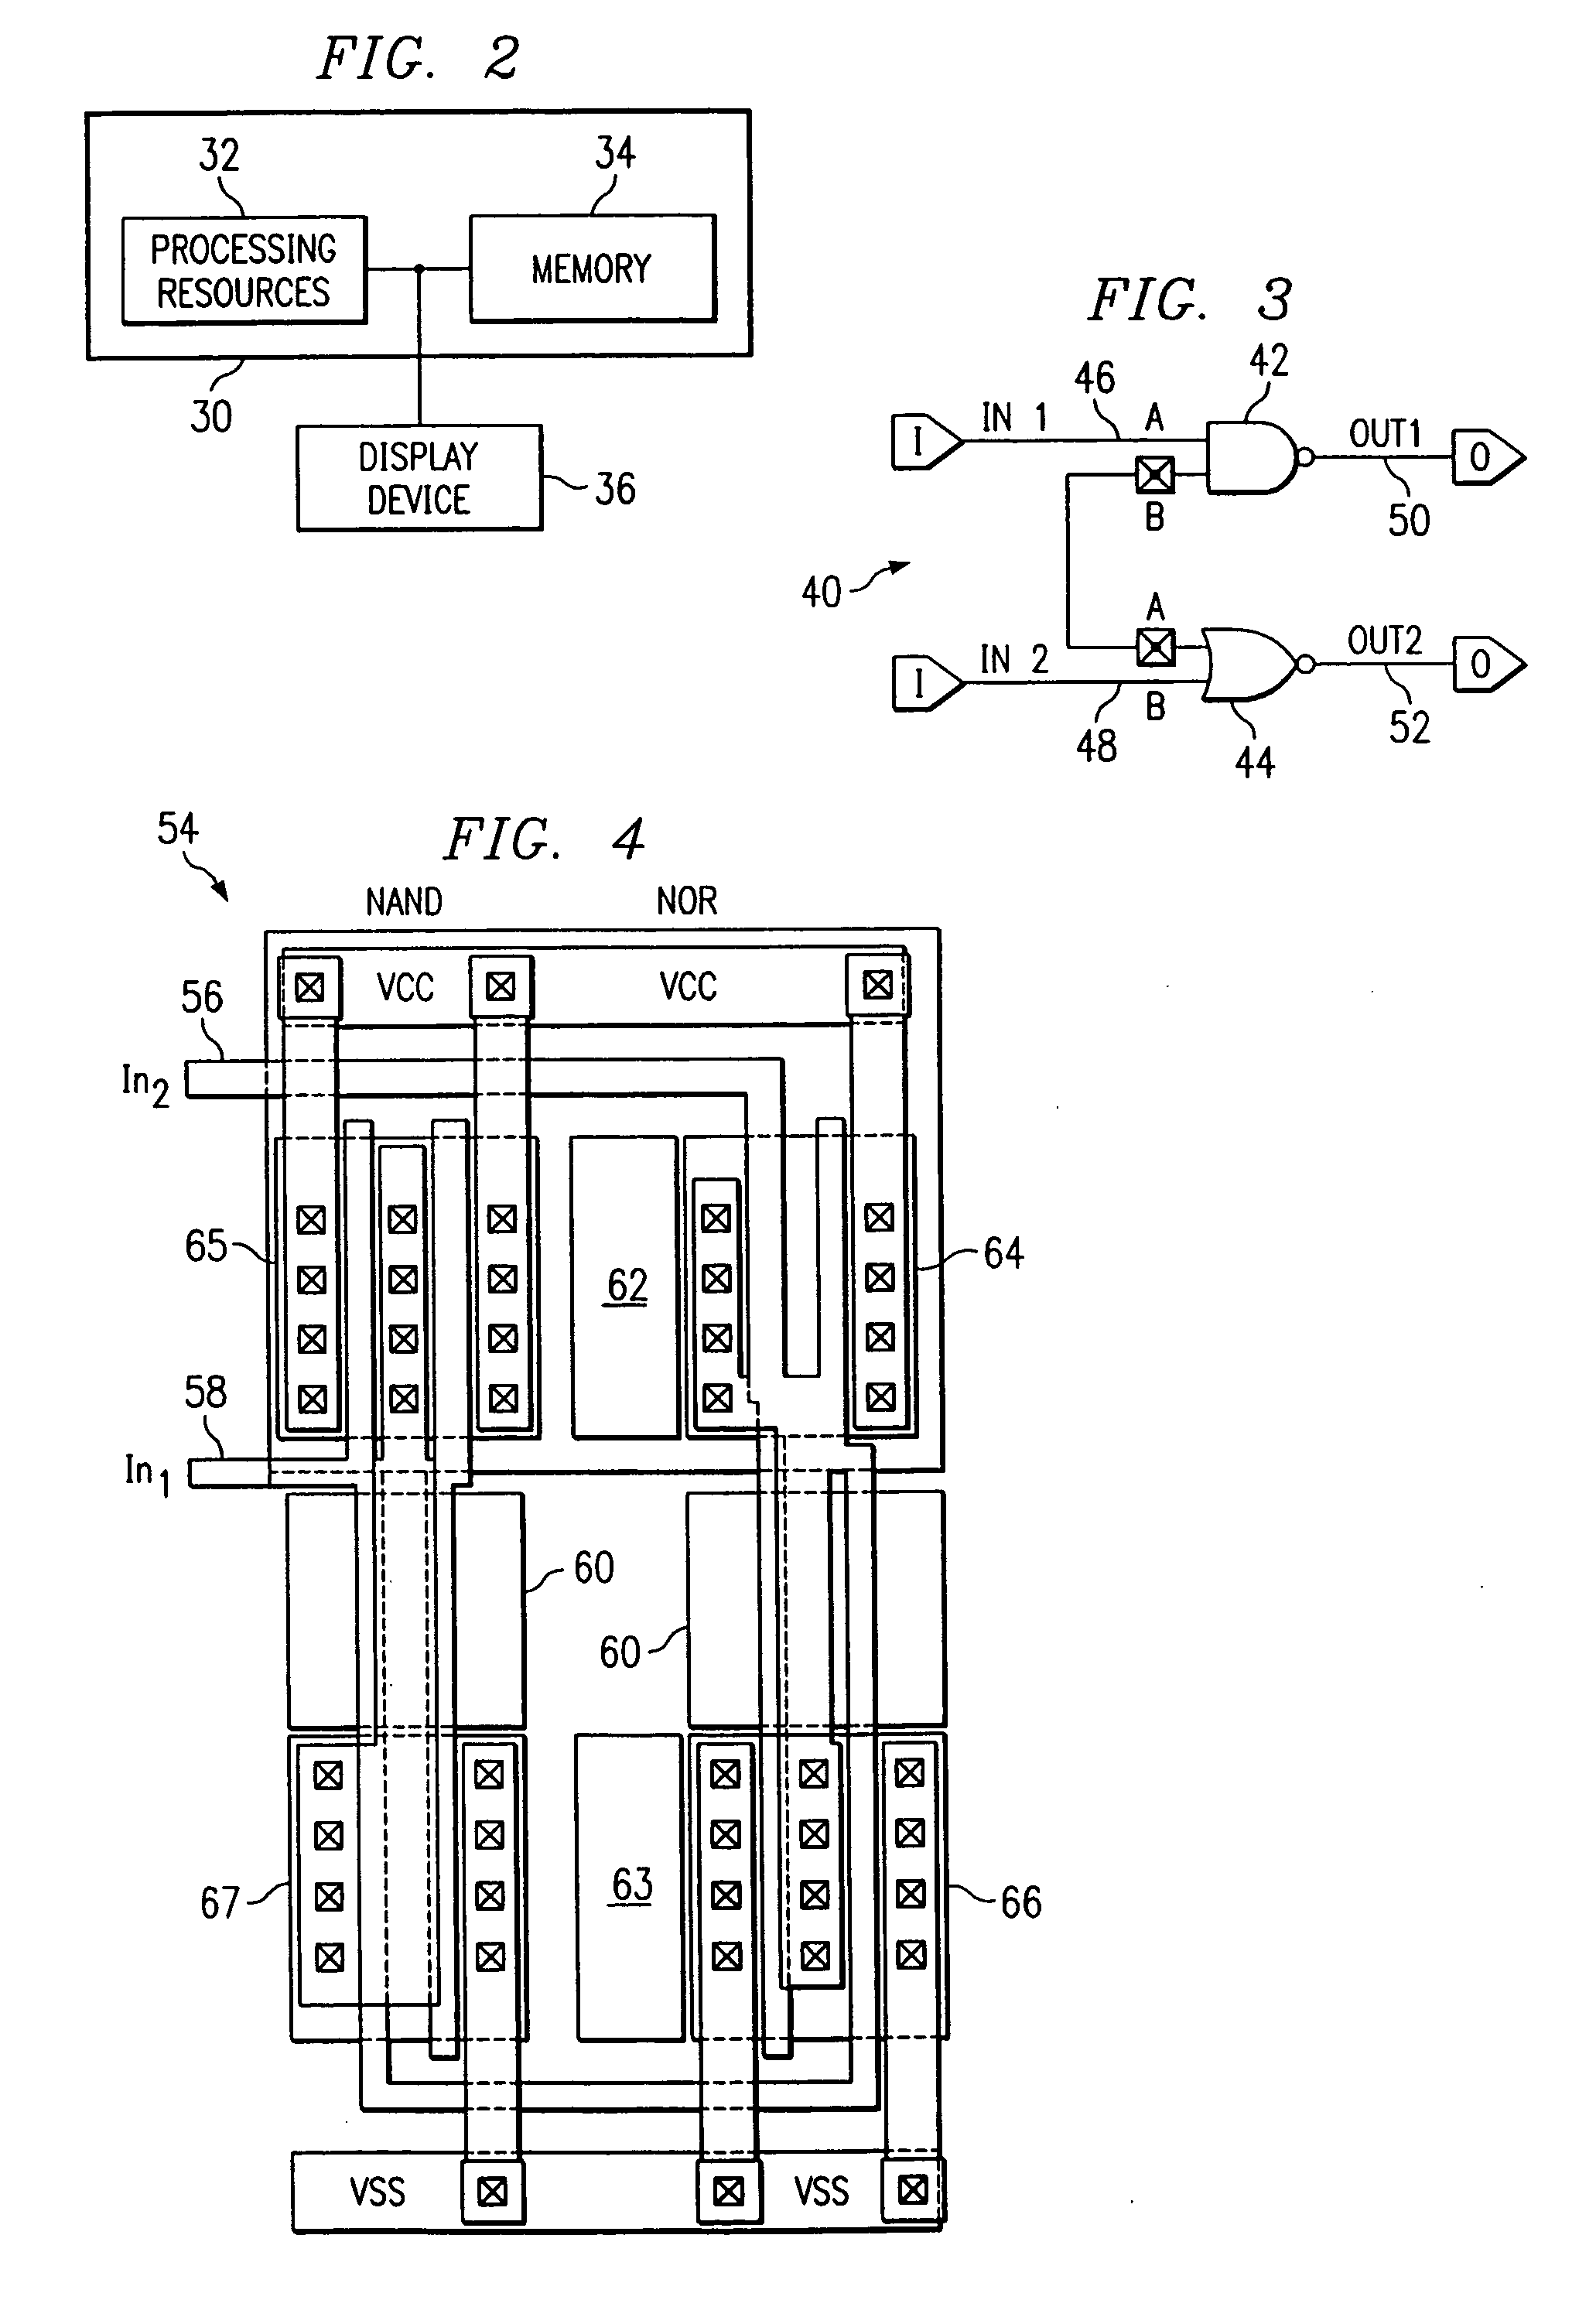 Photomask and integrated circuit manufactured by automatically eliminating design rule violations during construction of a mask layout block